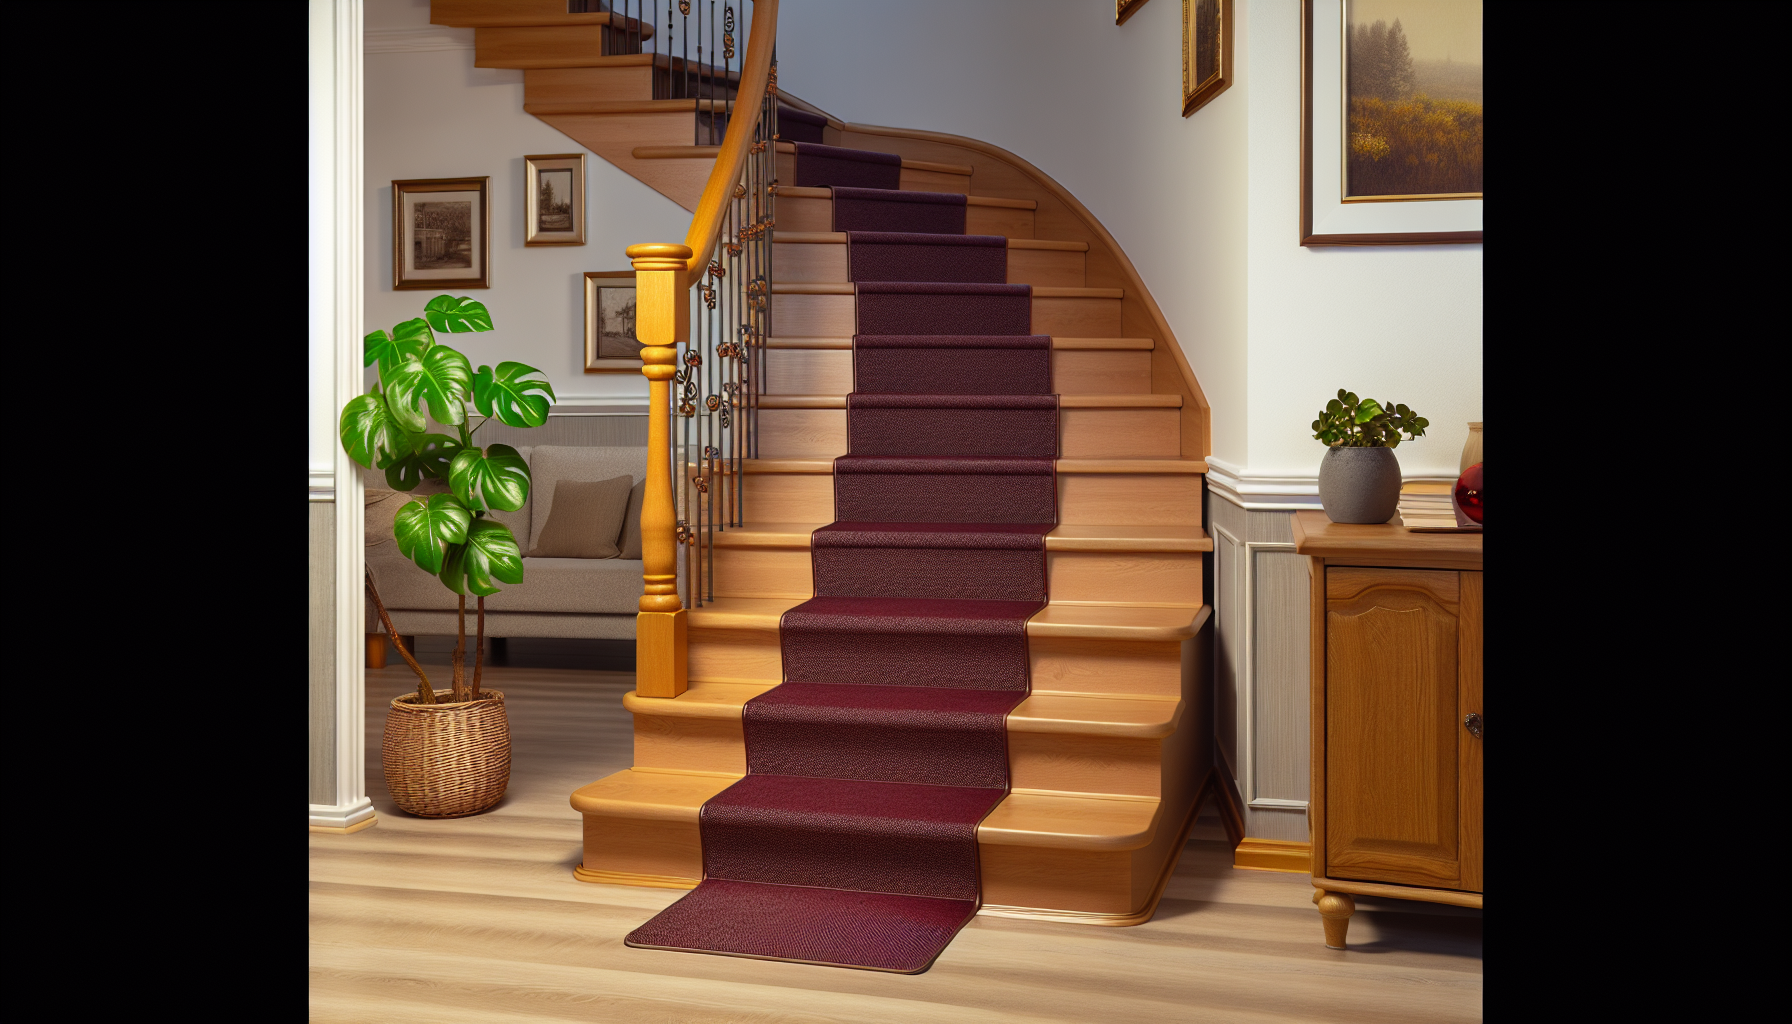 Stair runners for safety